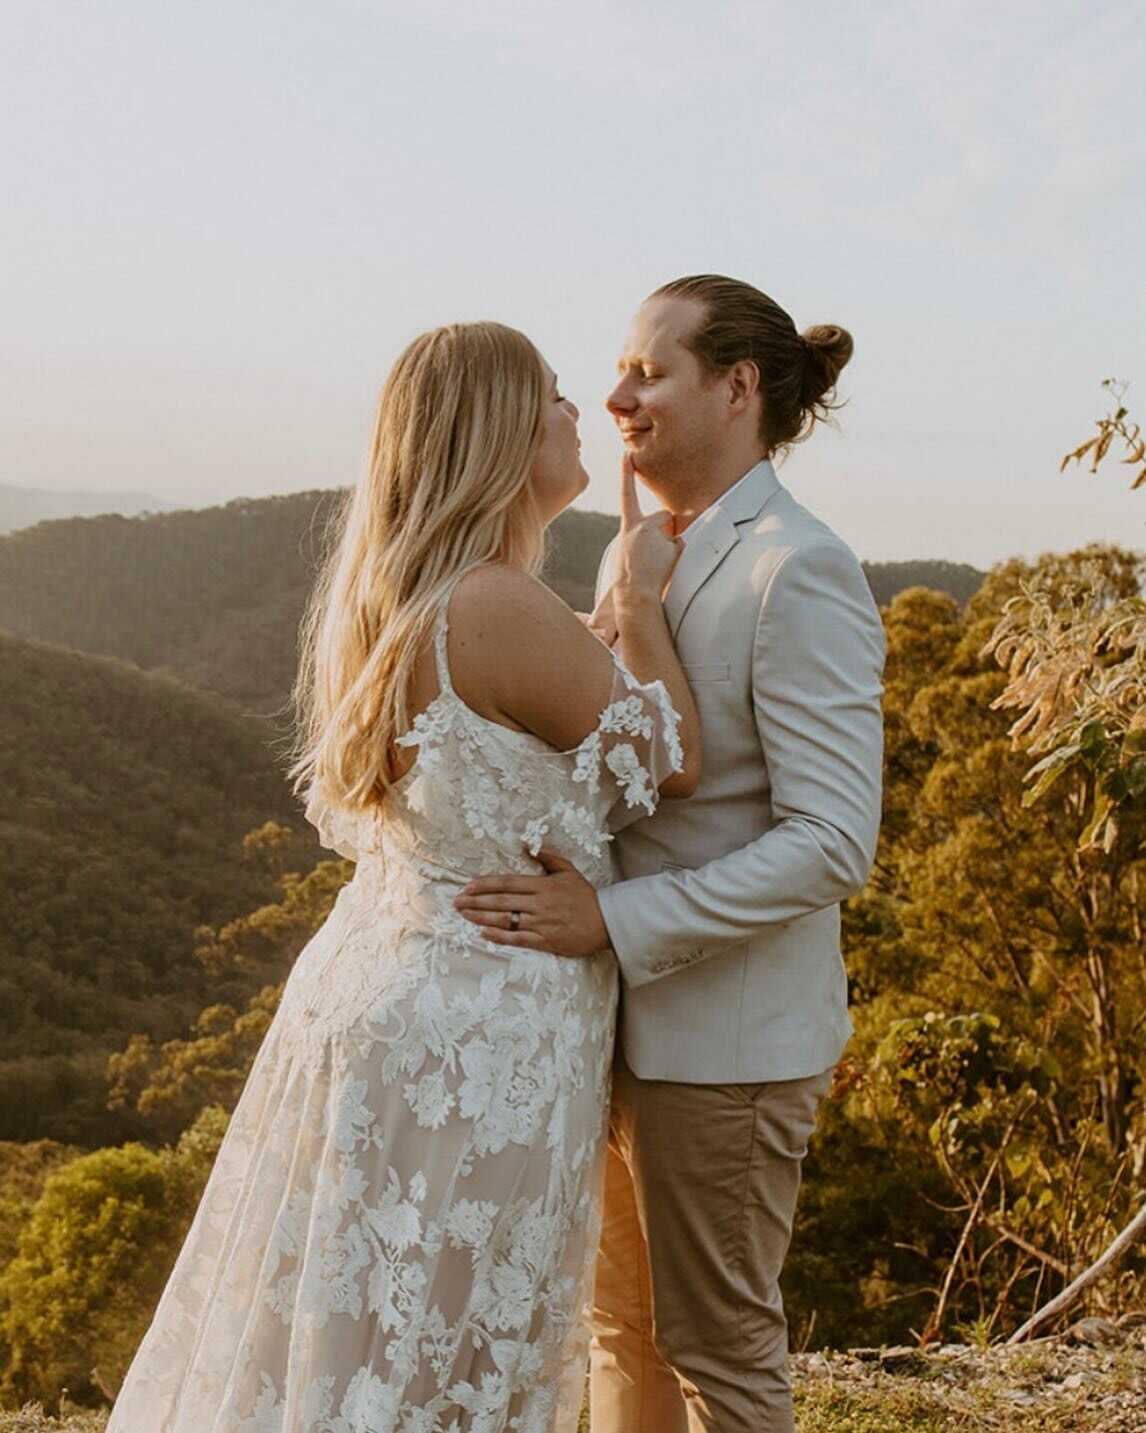 The gorgeous J&amp;N at another one of our exclusive Elopement Locations - Tambourine Residence

Planner &amp; Stylist @evermore.events__ 
Photographer @by.ebony 
Bride &amp; Groom @jenaayaa @nathhogg92

#elopement #microwedding #wedding #brisbanewed